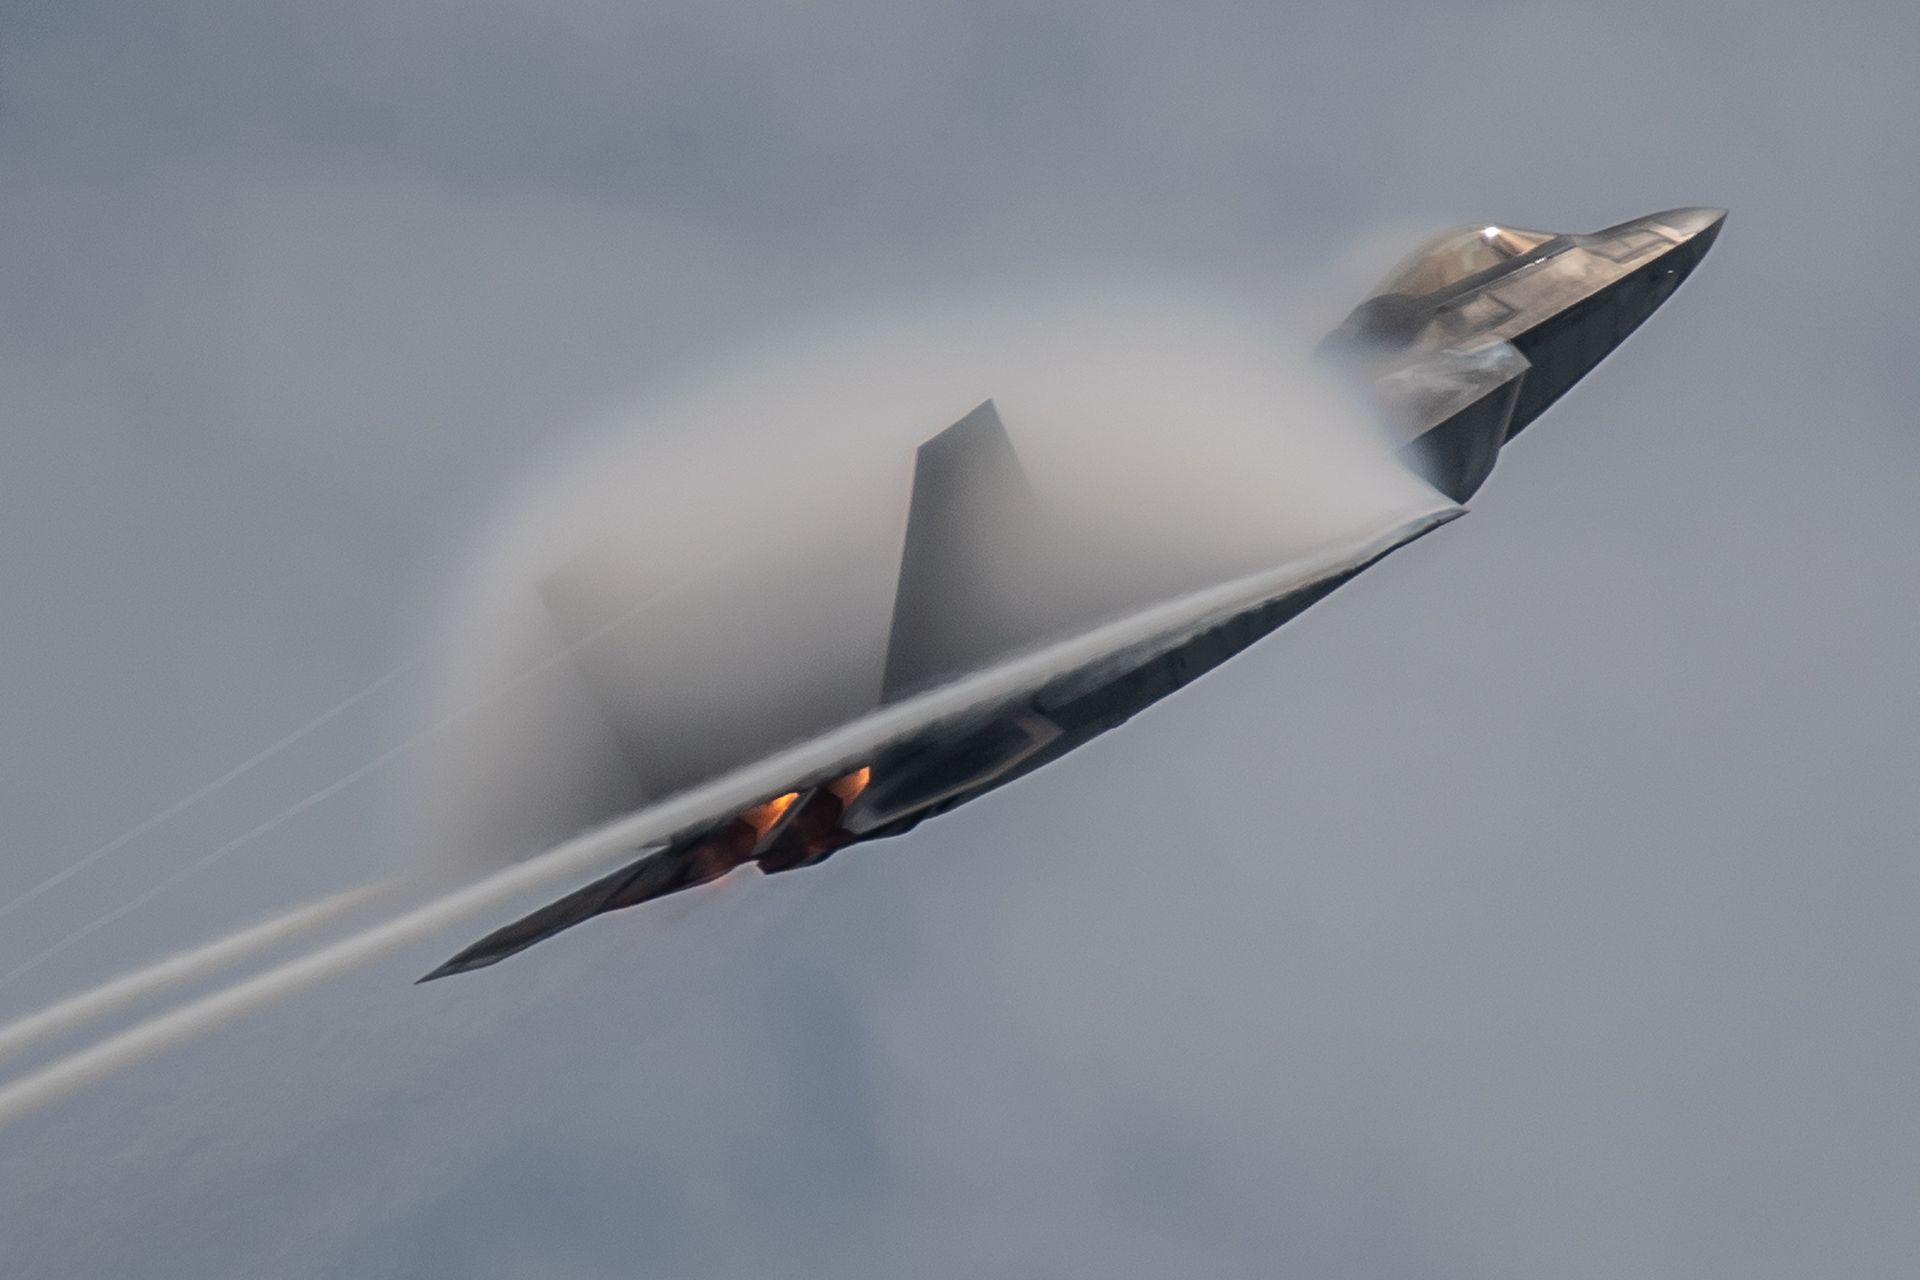 F-22 at the Singapore Airshow 2020